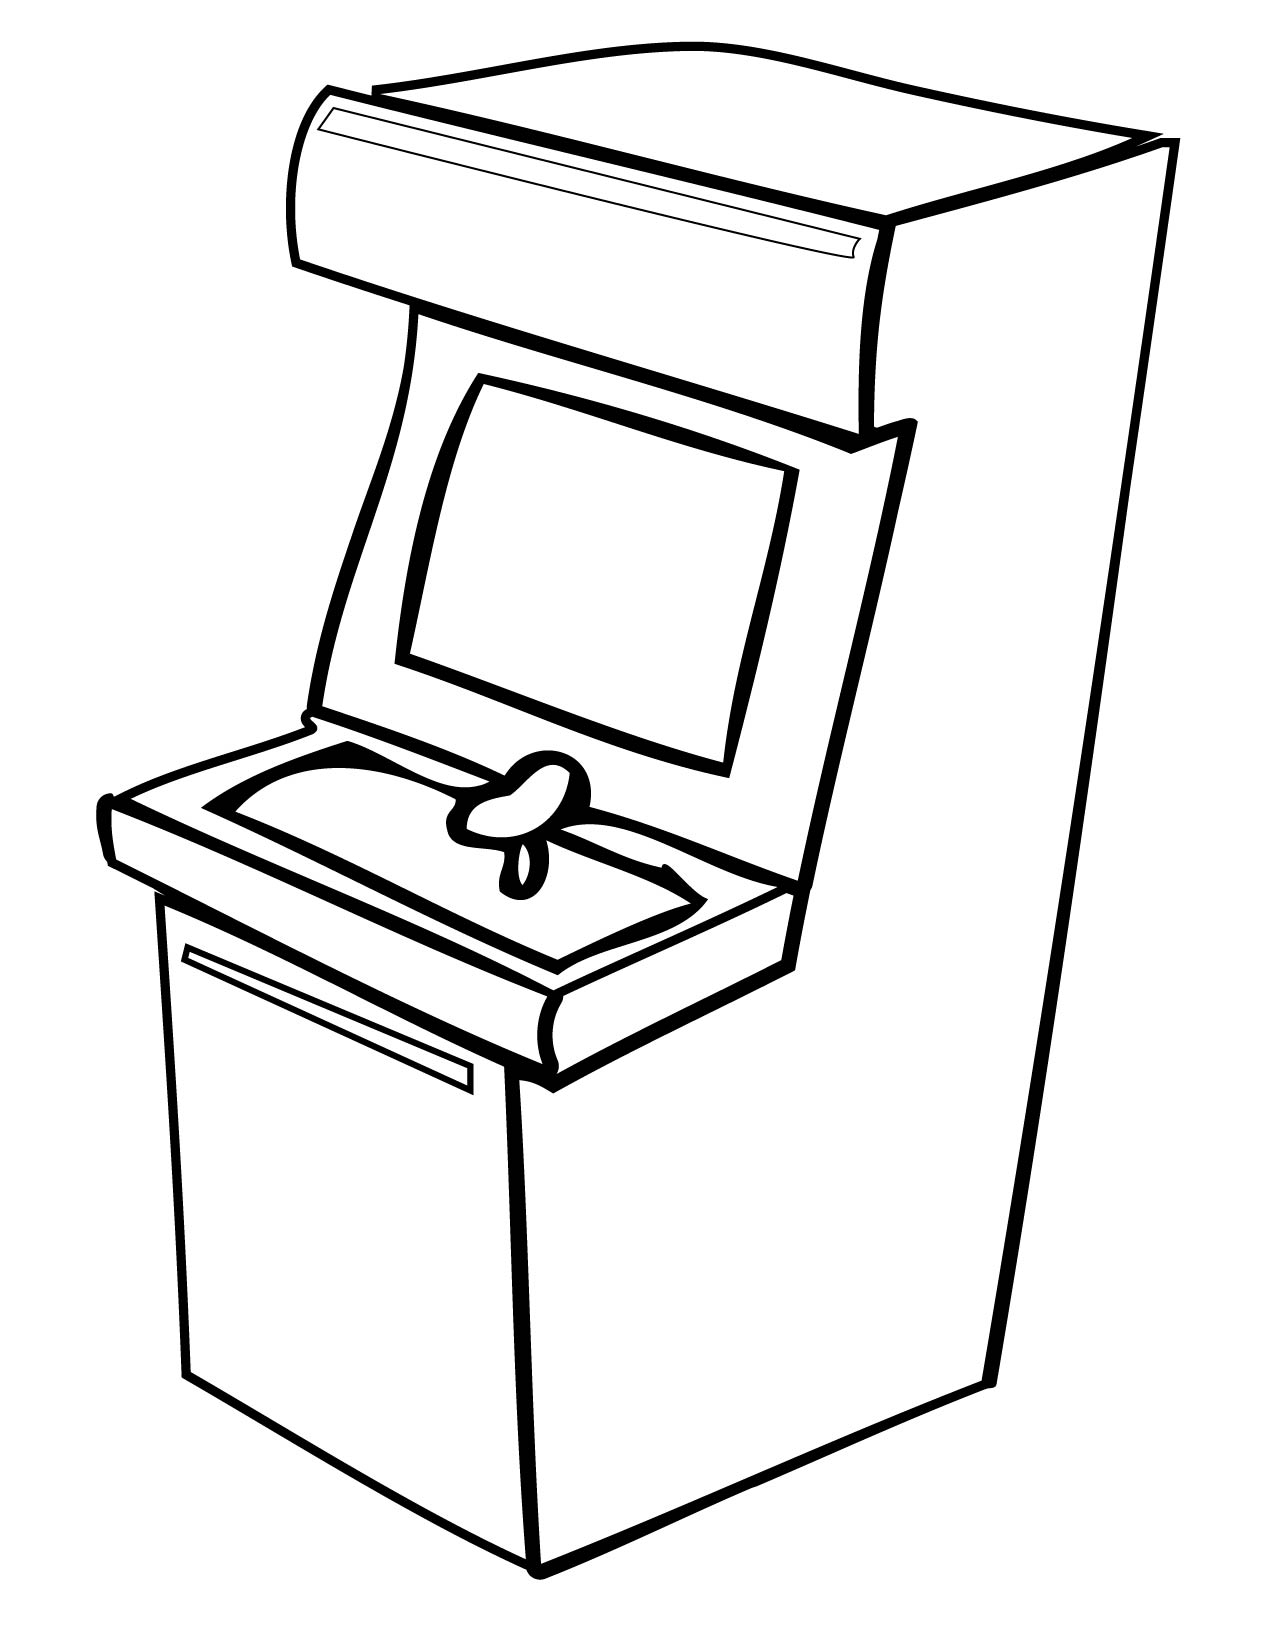 Arcade Coloring Pages At GetColorings Free Printable Colorings